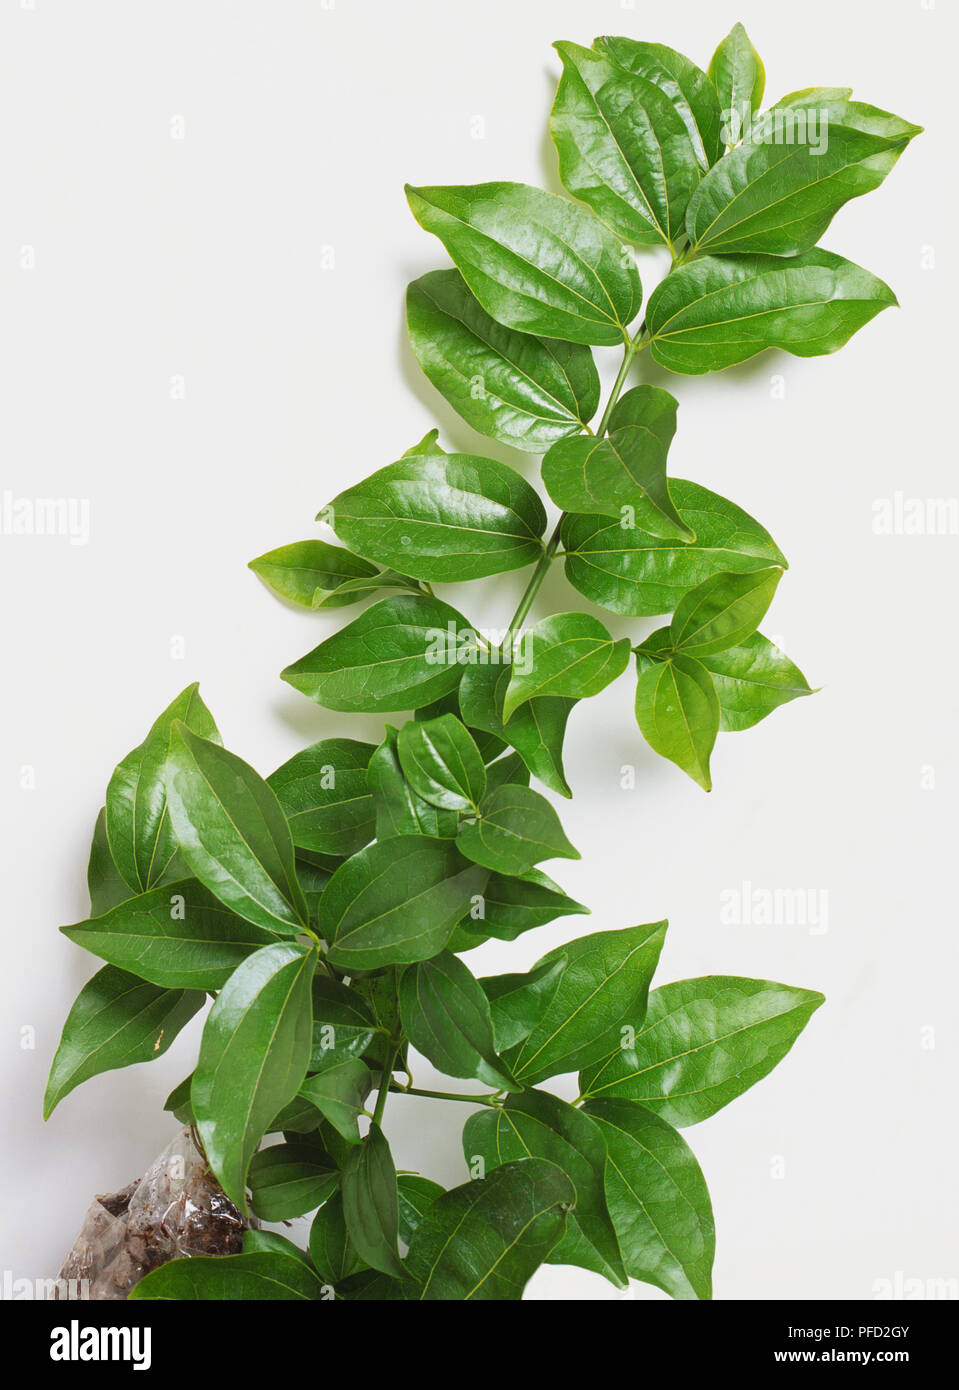 Strychnos nux-vomica, leaves from Strychnine Tree. Stock Photo